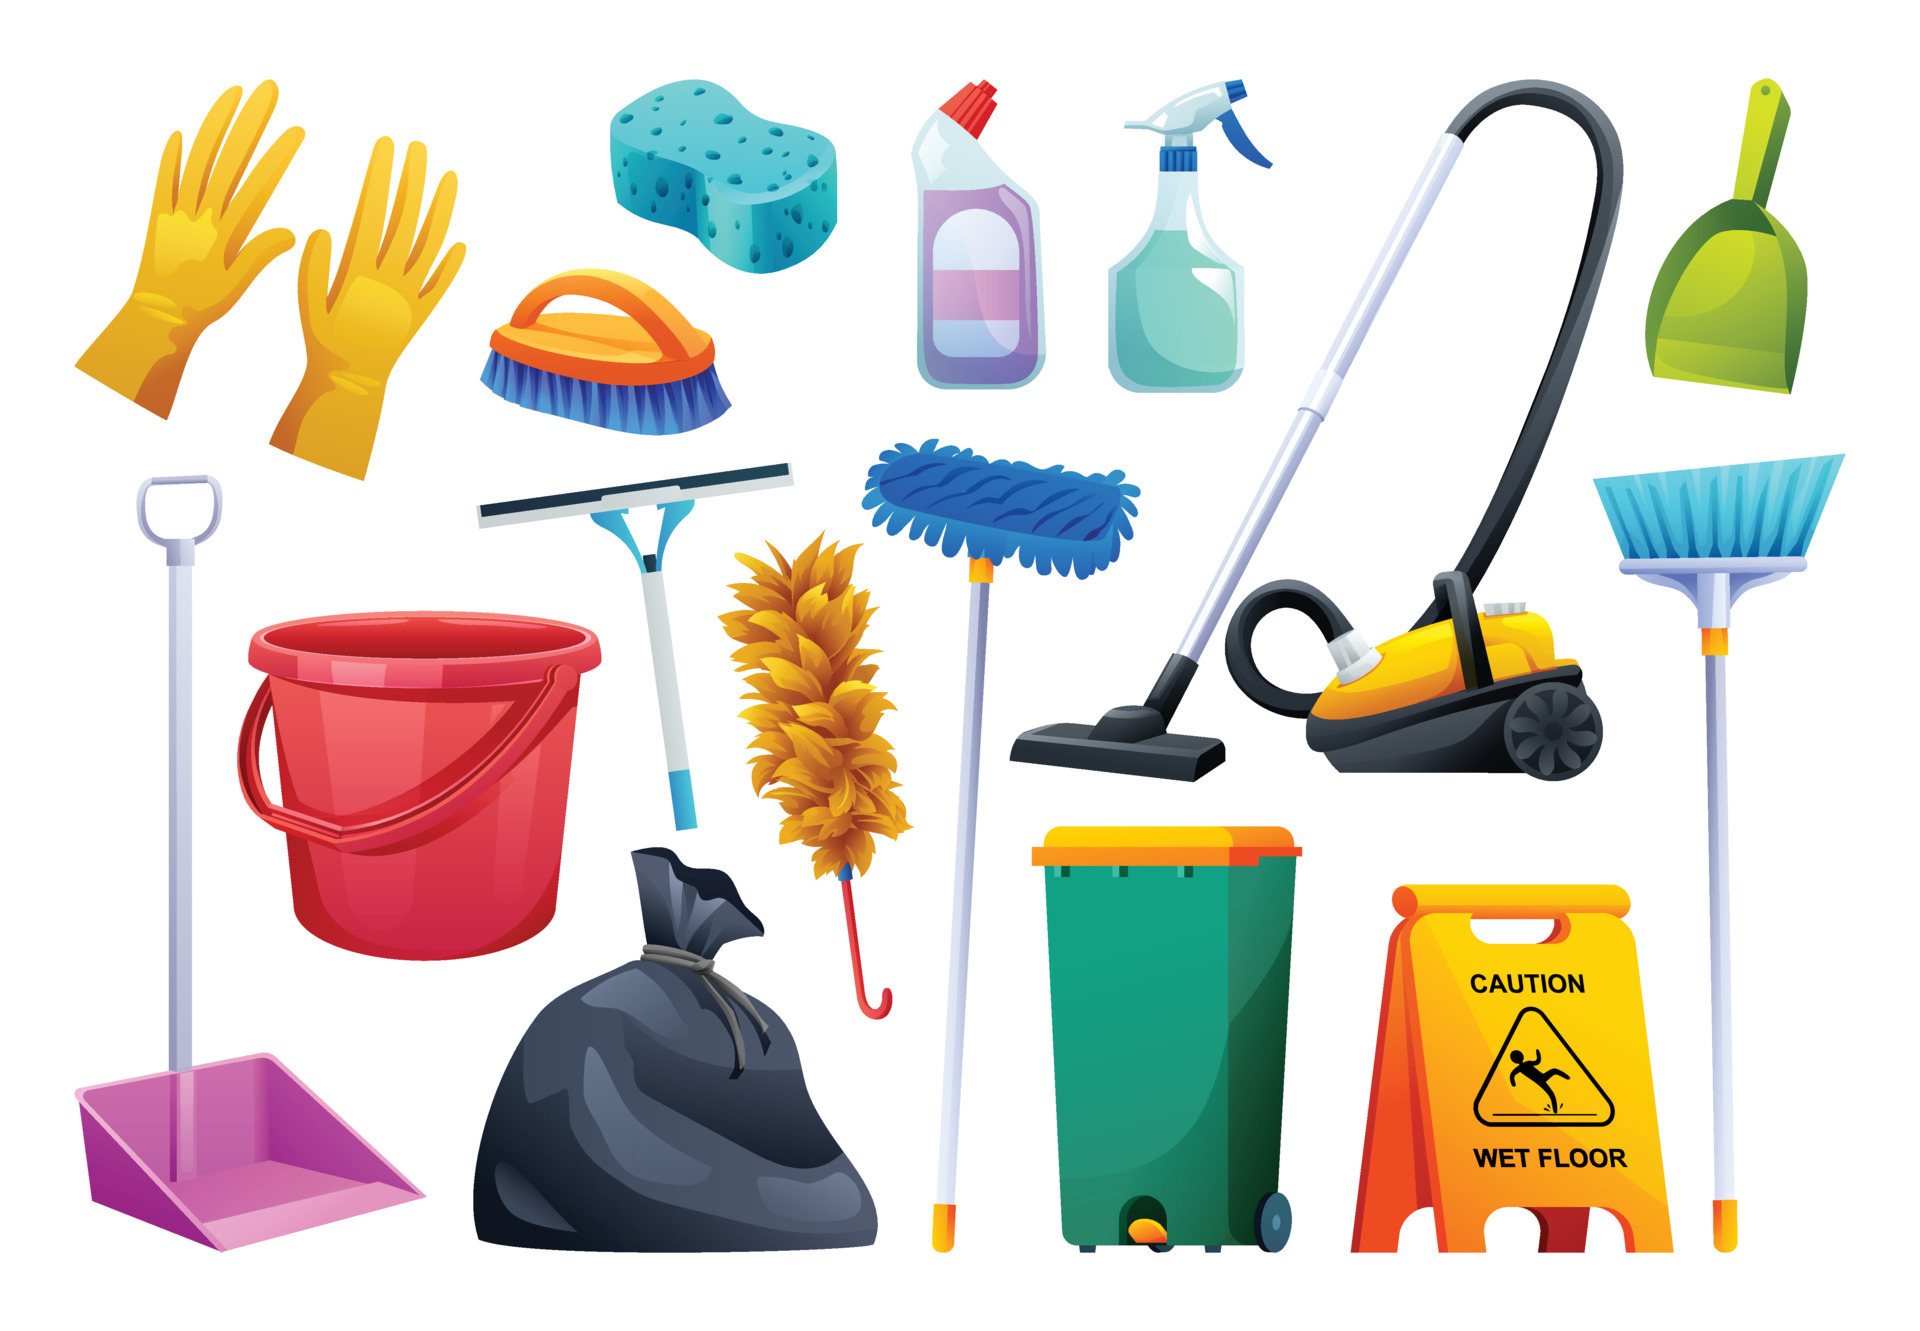 https://static.vecteezy.com/system/resources/previews/021/488/635/original/set-of-cleaning-equipment-household-cleaning-service-tools-illustration-vector.jpg